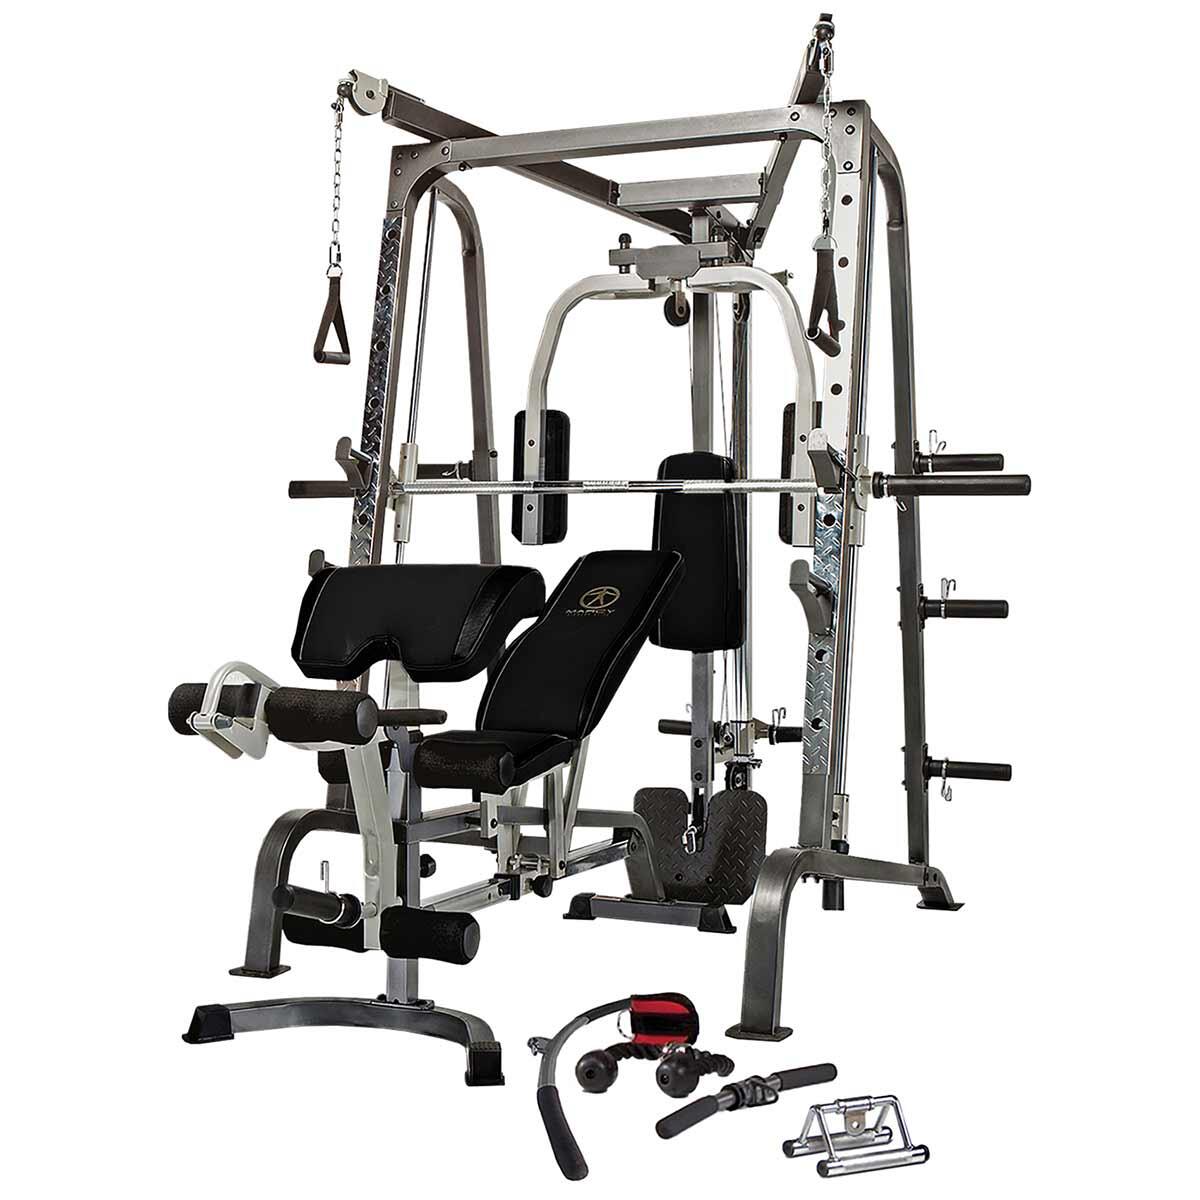 MARCY MARCY MD9010G DIAMOND ELITE DELUXE SMITH MACHINE WITH WEIGHT BENCH